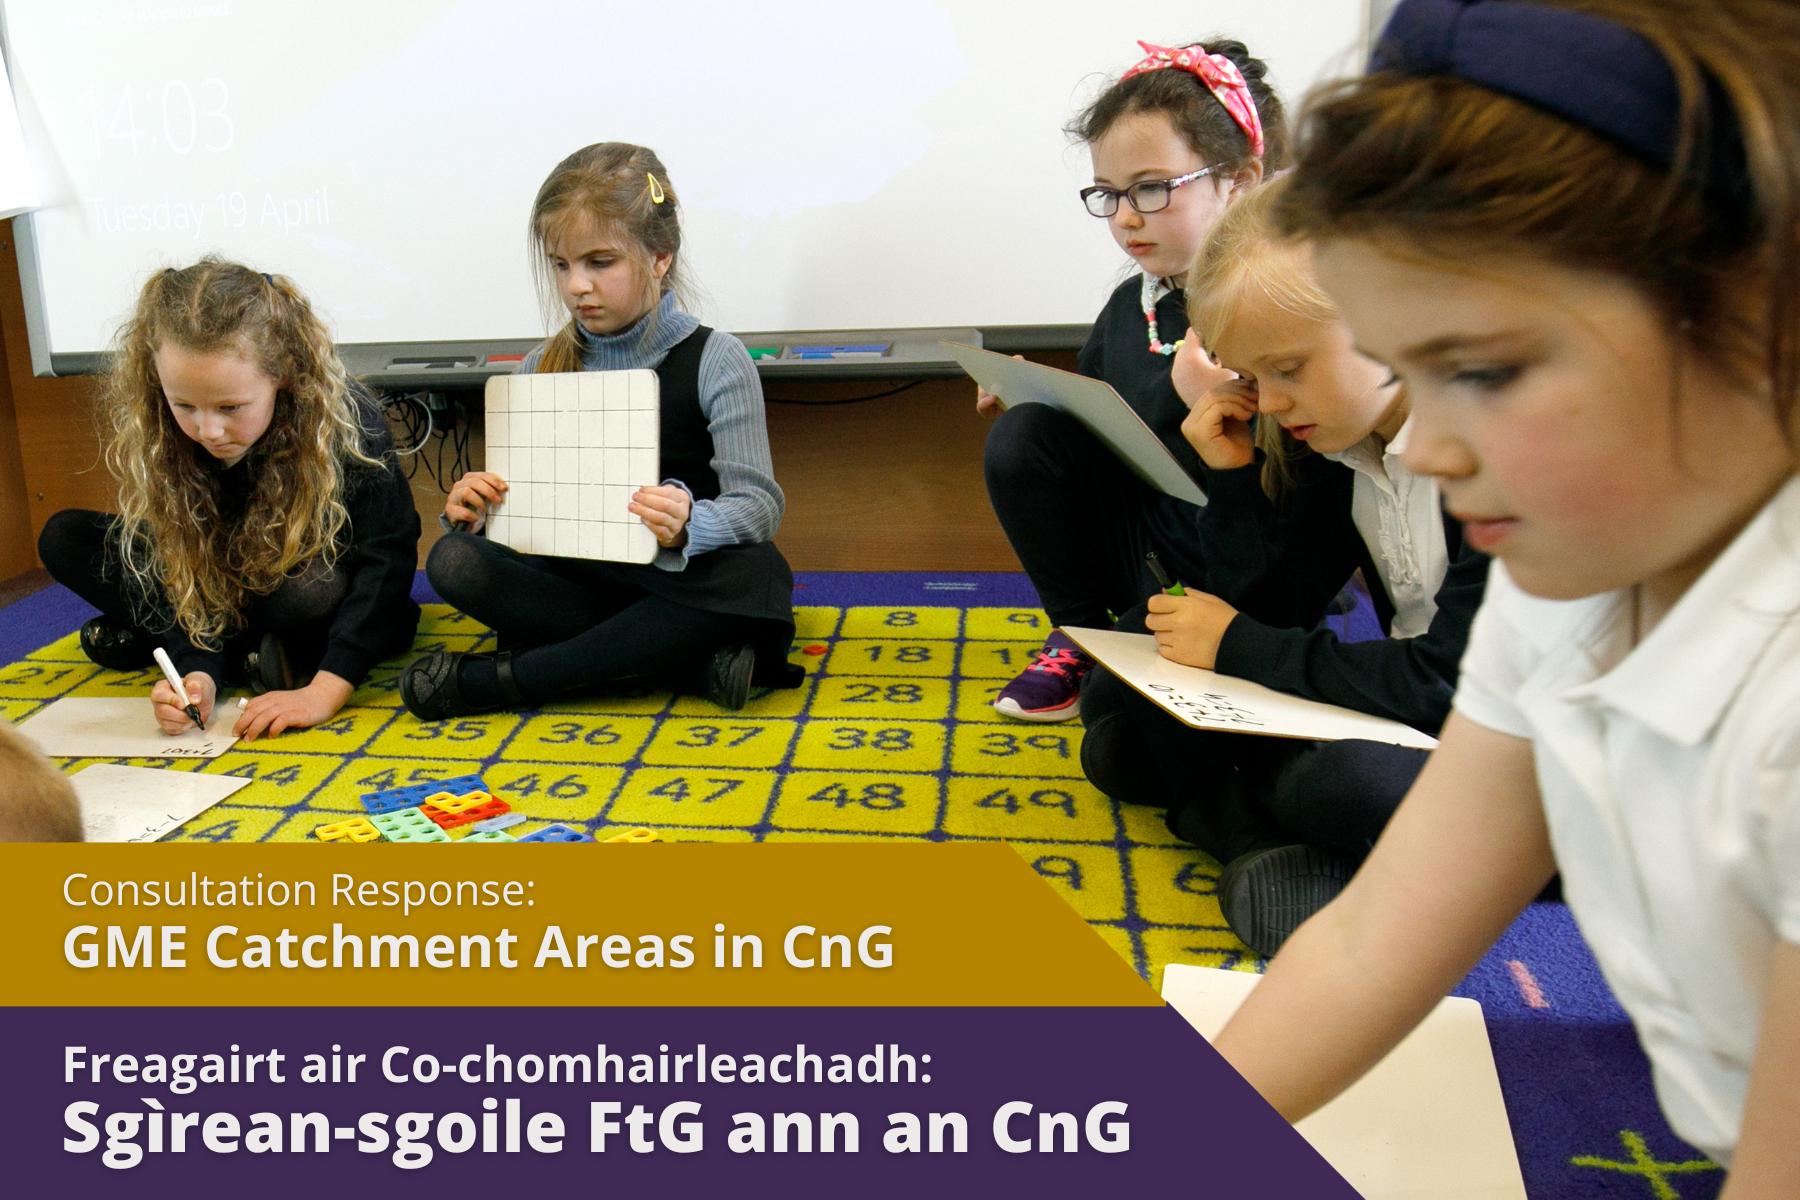 Picture: Primary School children sitting in circle writing with pens on whiteboards with text over picture. Text reads 'Consultation Response: GME Catchment Areas in CnG'